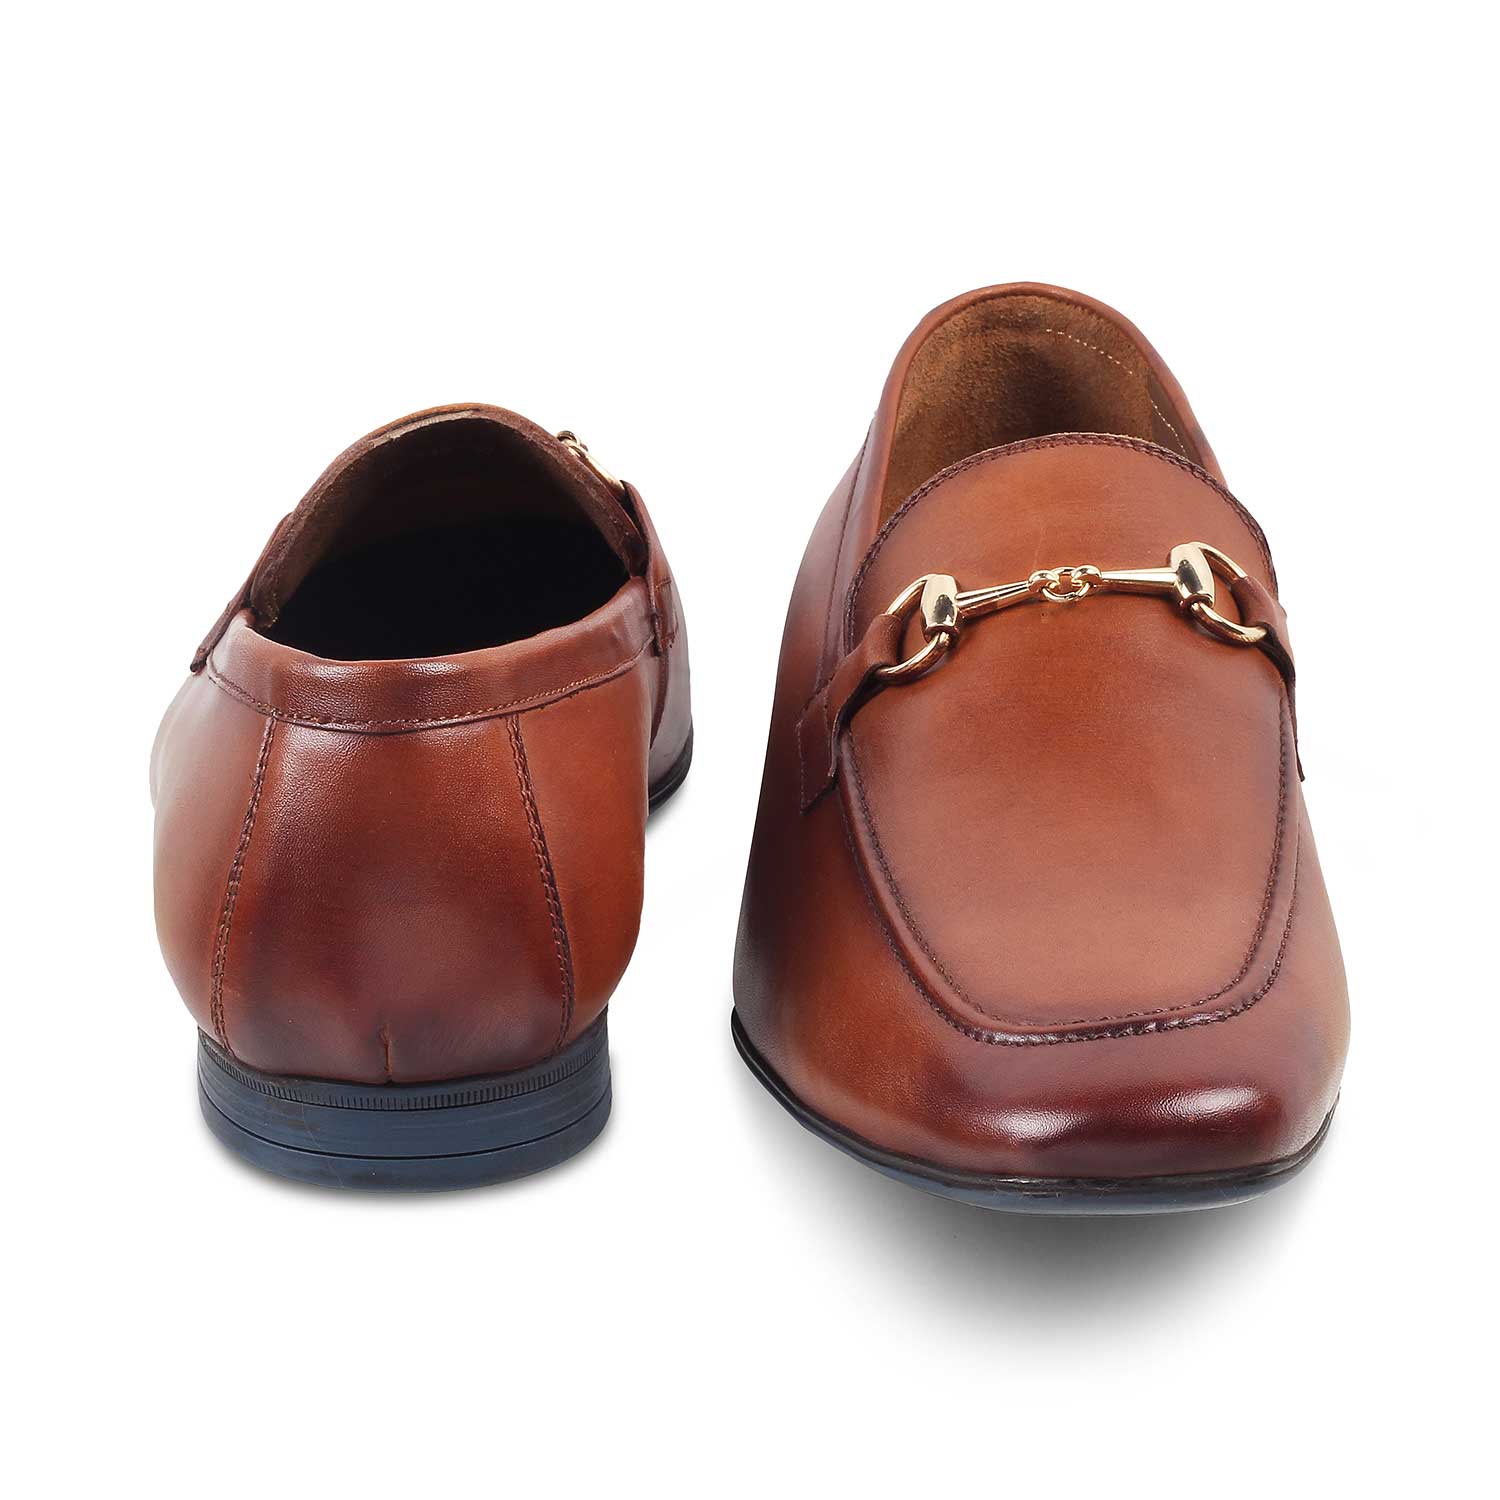 The Niko-2 Tan Men's Horse-Bit Leather Loafers Tresmode - Tresmode